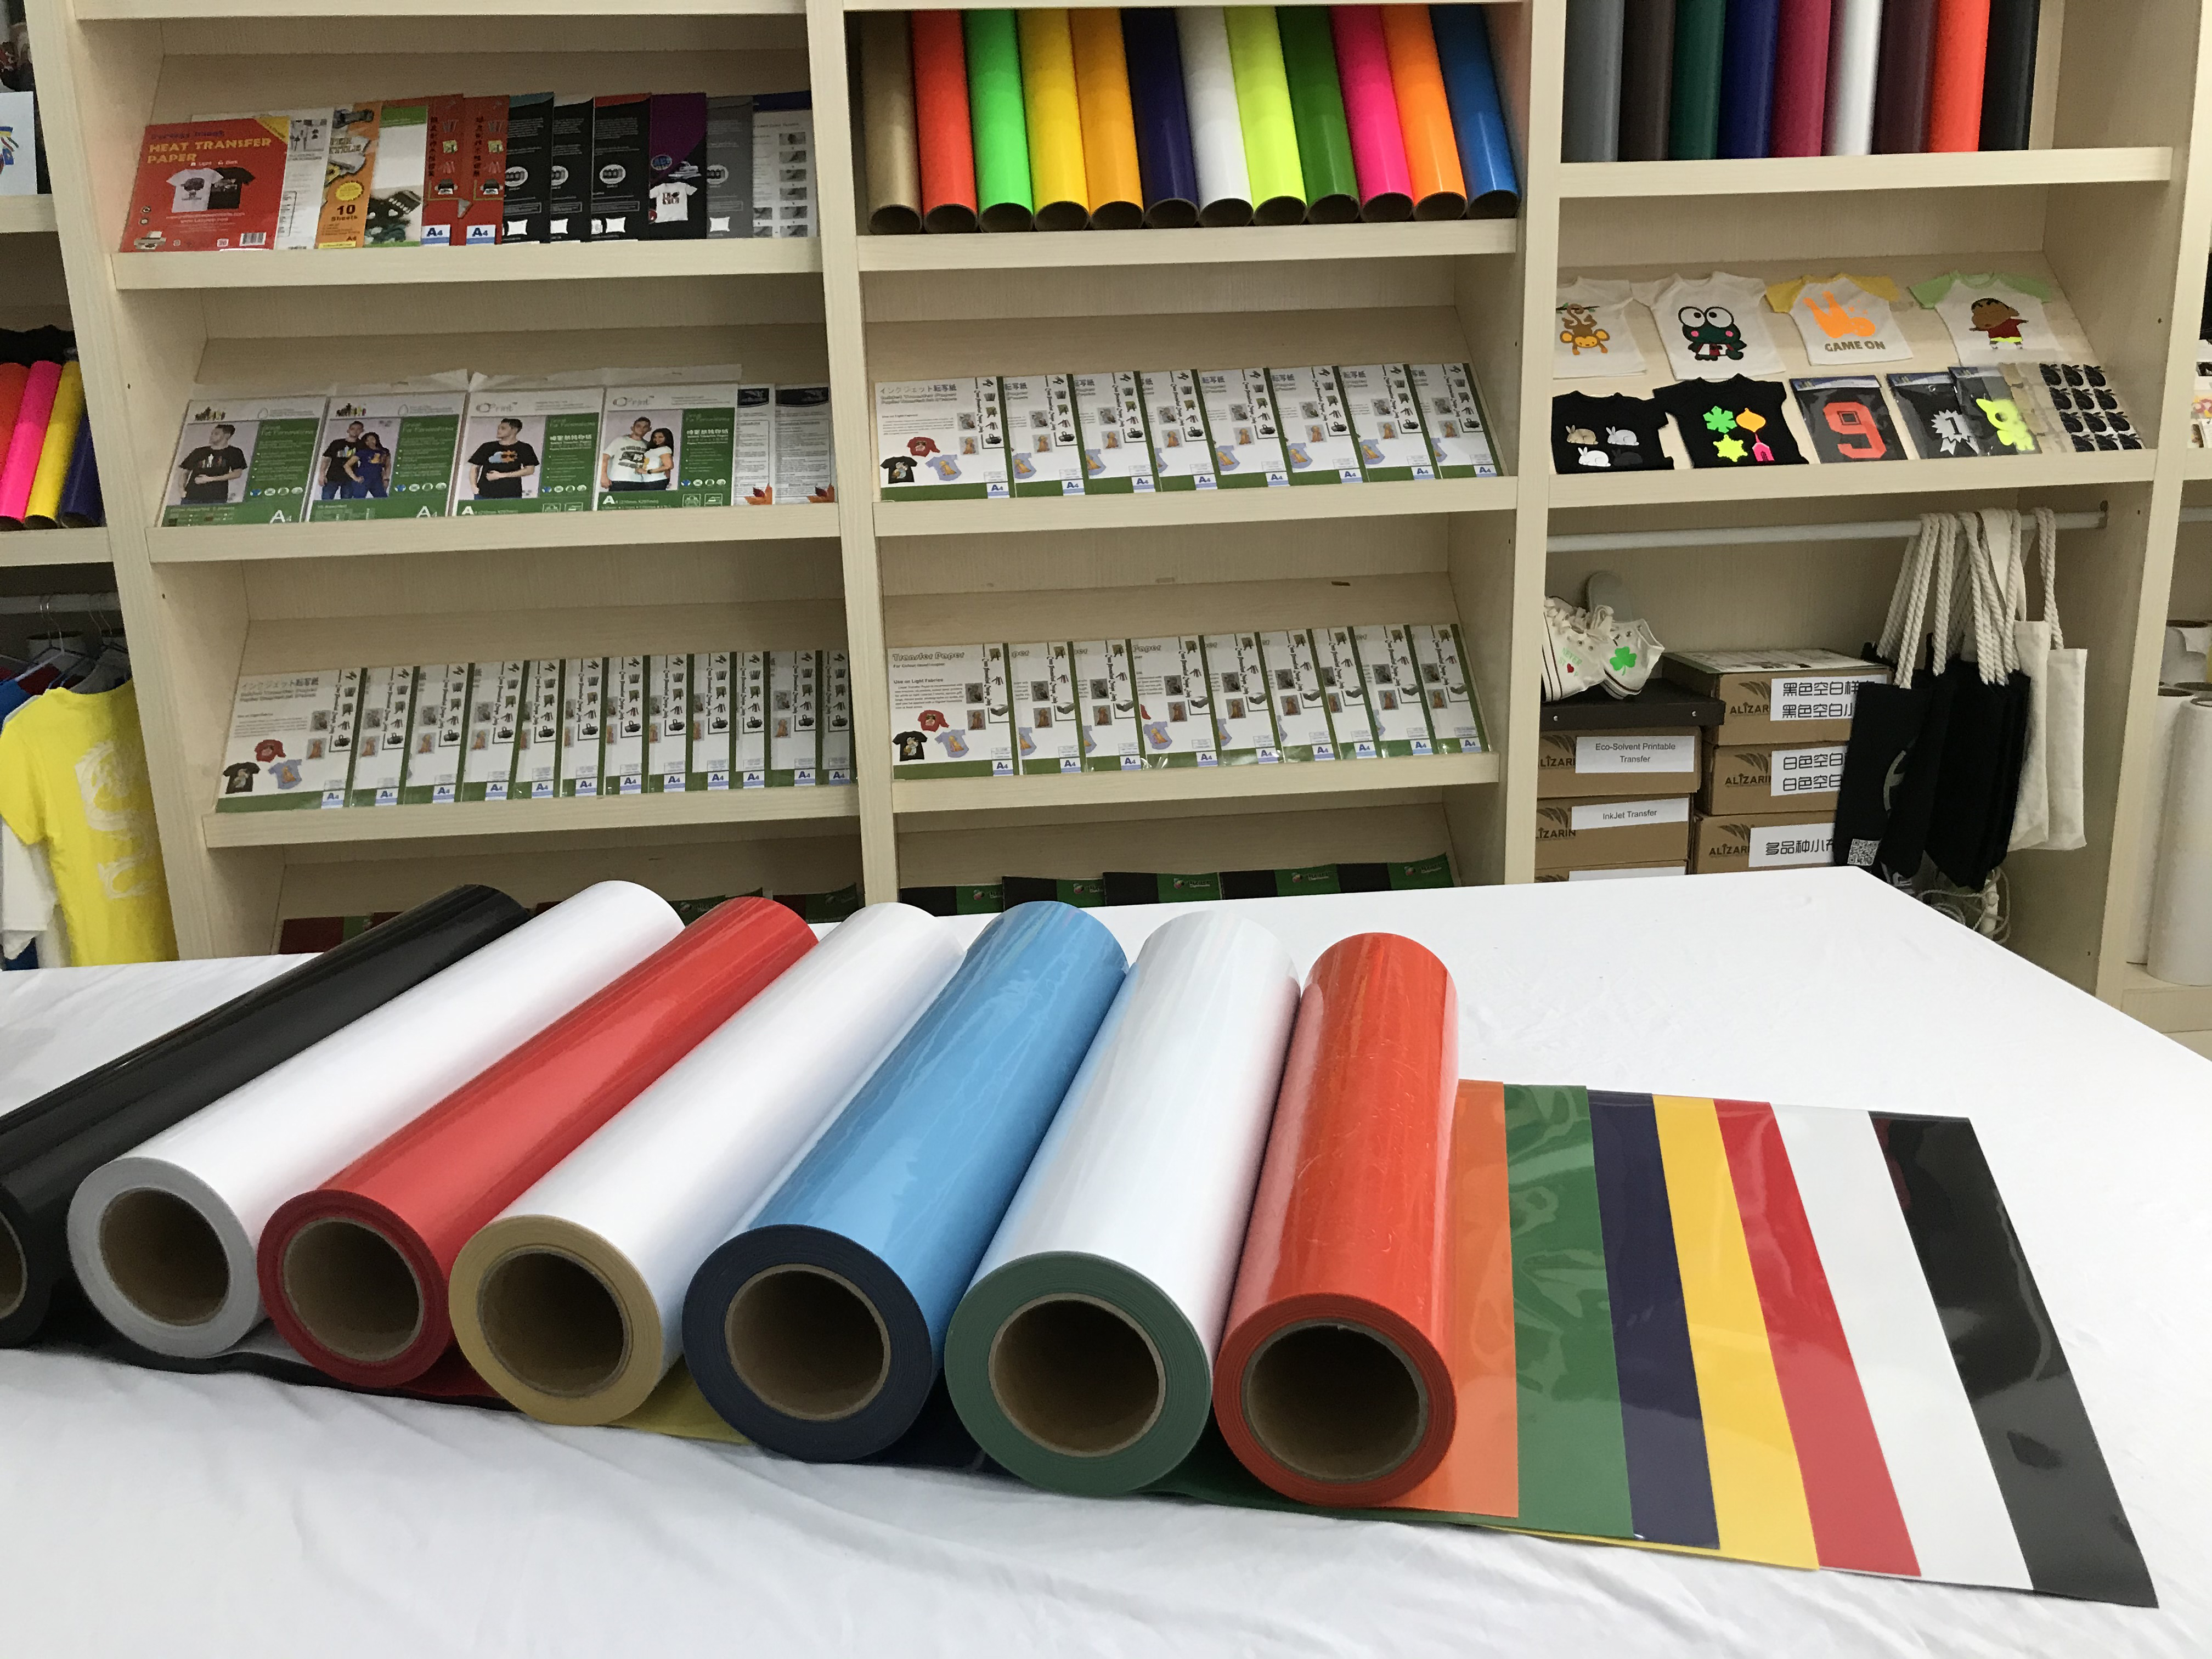 China Heat Transfer Vinyl Flock manufacturers and suppliers